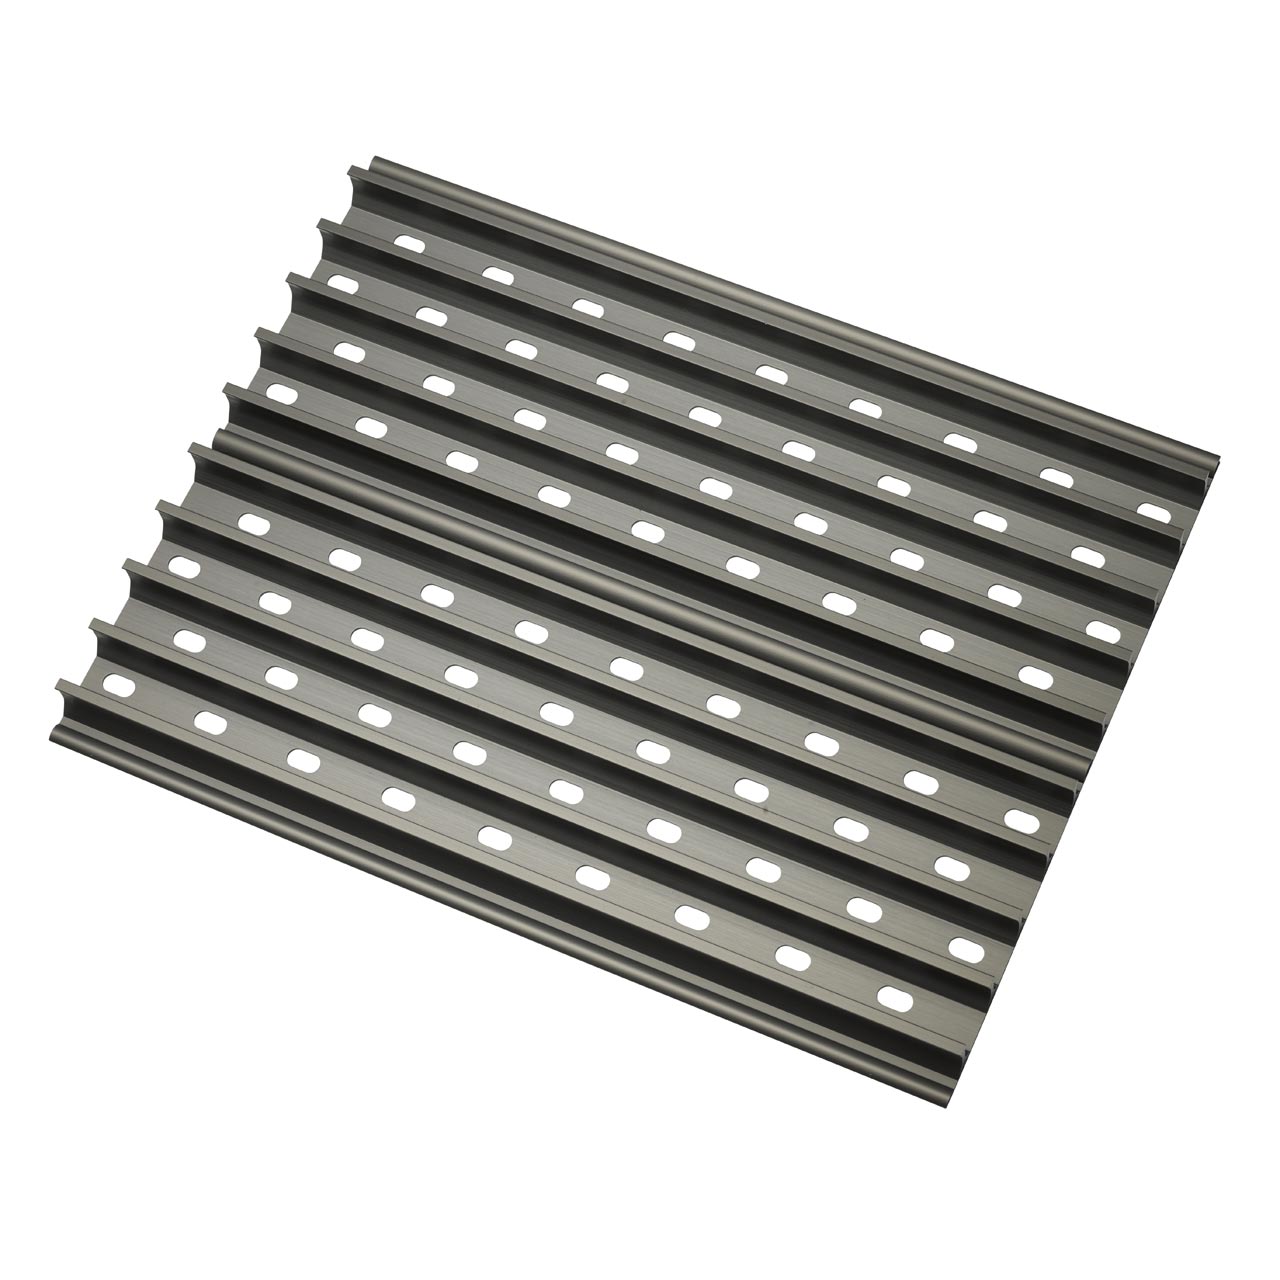 Grill Grate 2 30,48 x 13,34 cm, Grill Grate Gas/Pellet Grill